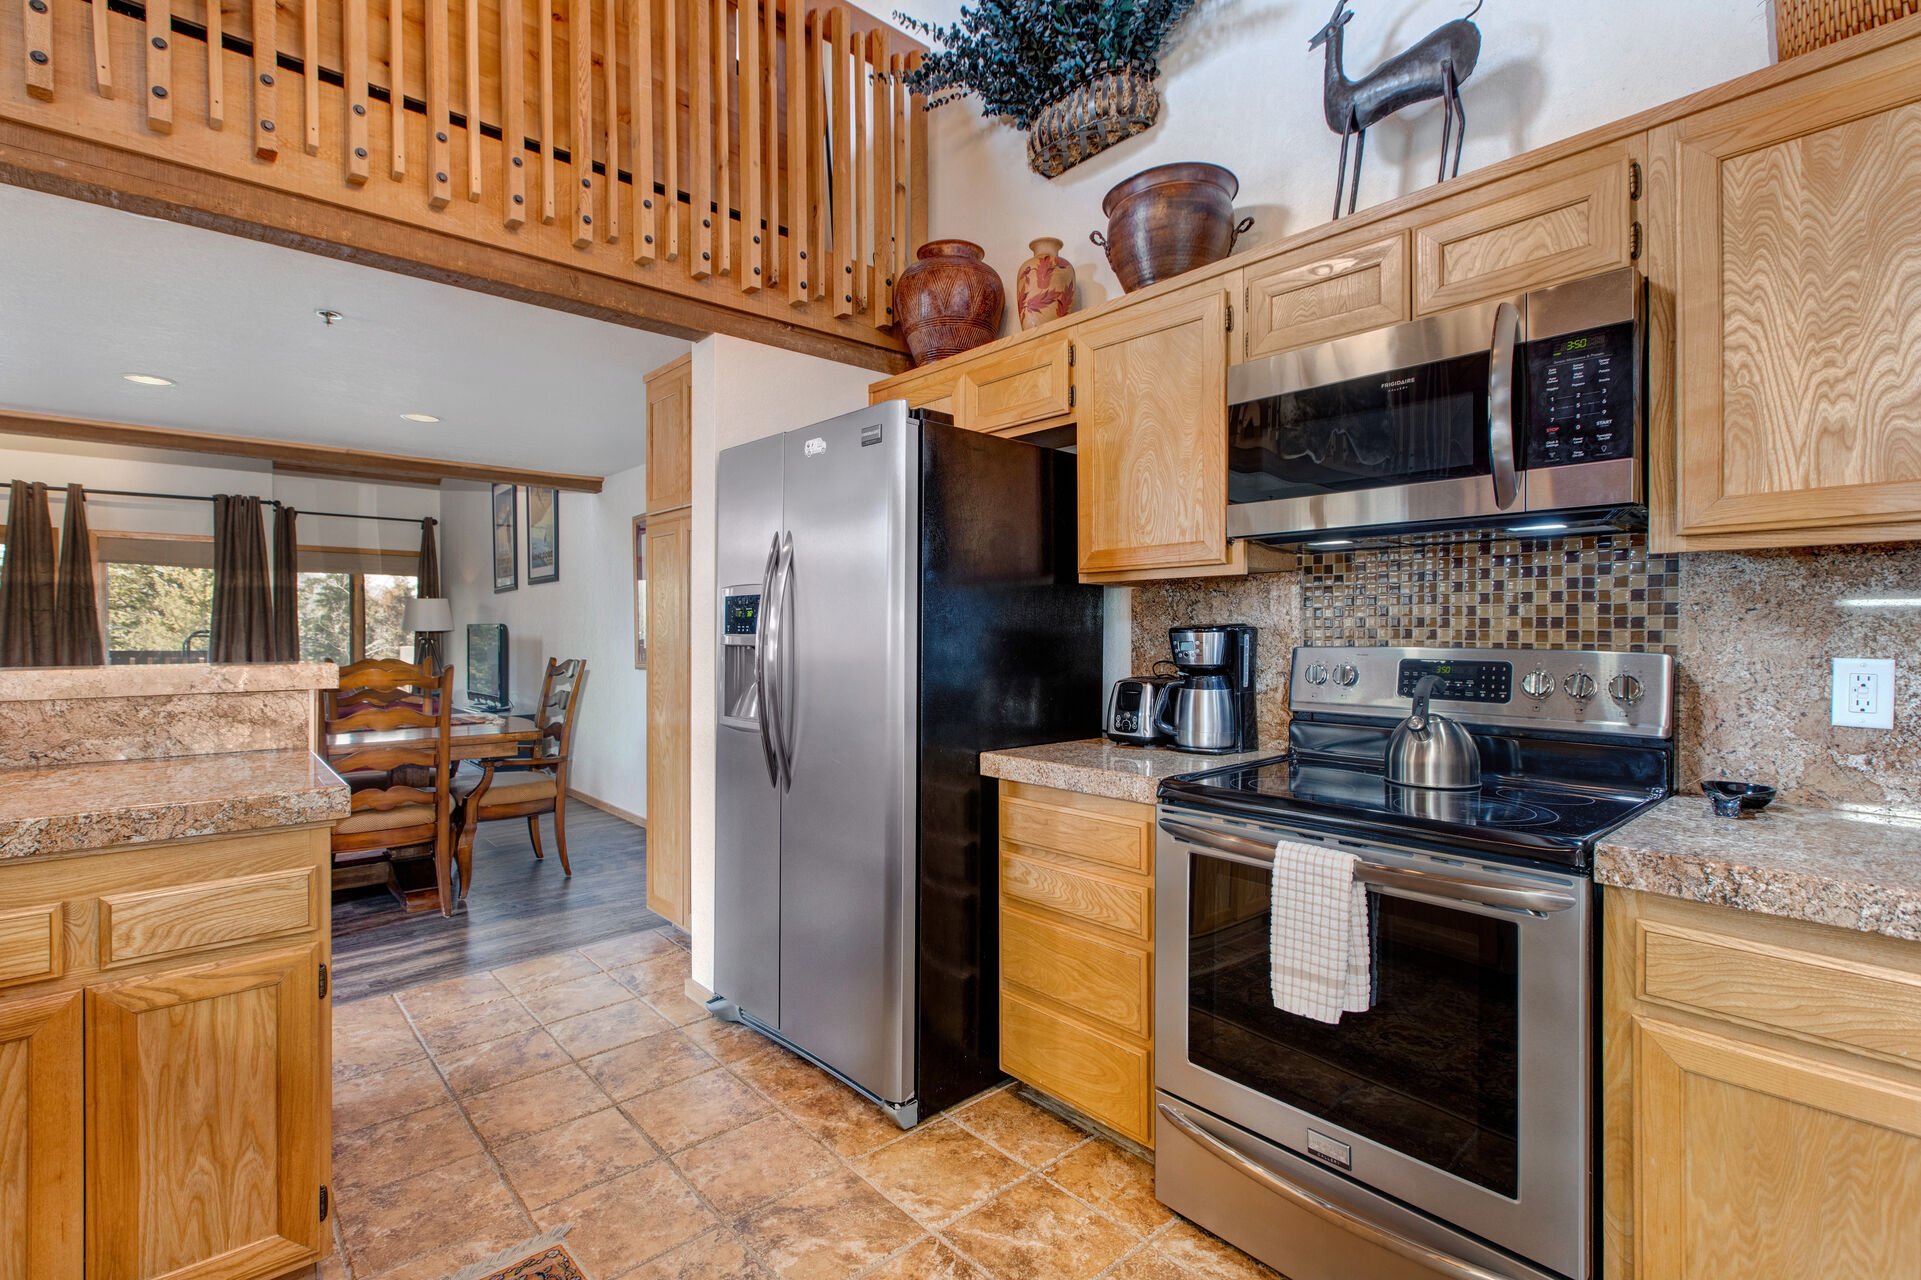 Fully Equipped Kitchen with stainless steel Frigidaire appliances, stone countertops, breakfast nook with seating for four, and bar seating for four